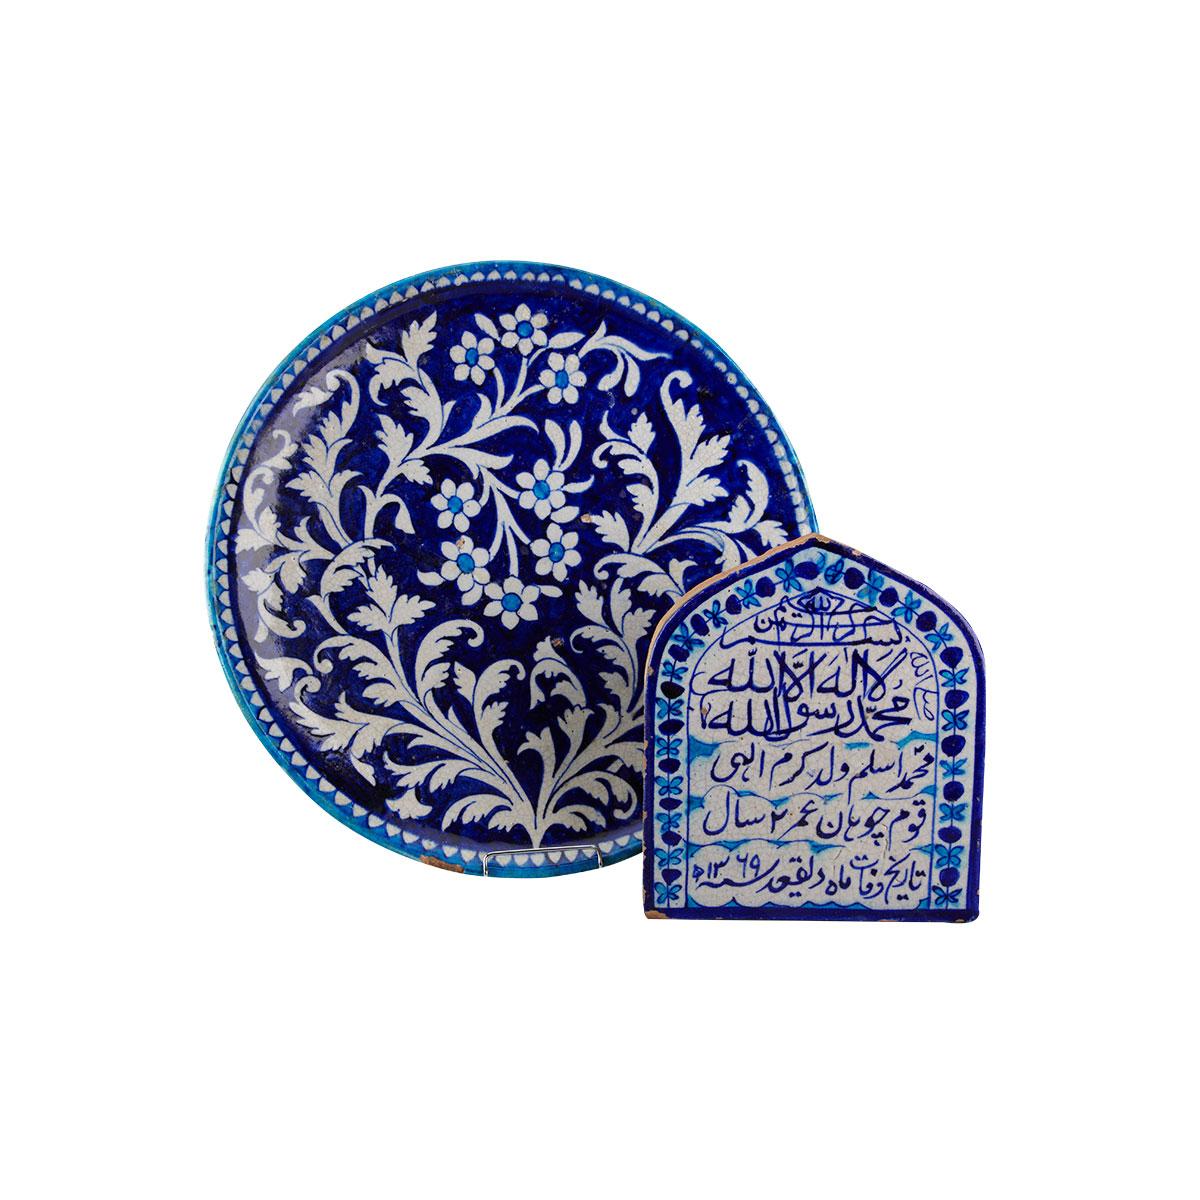 Large Blue and White Charger, Multan, Pakistan, 19th Century